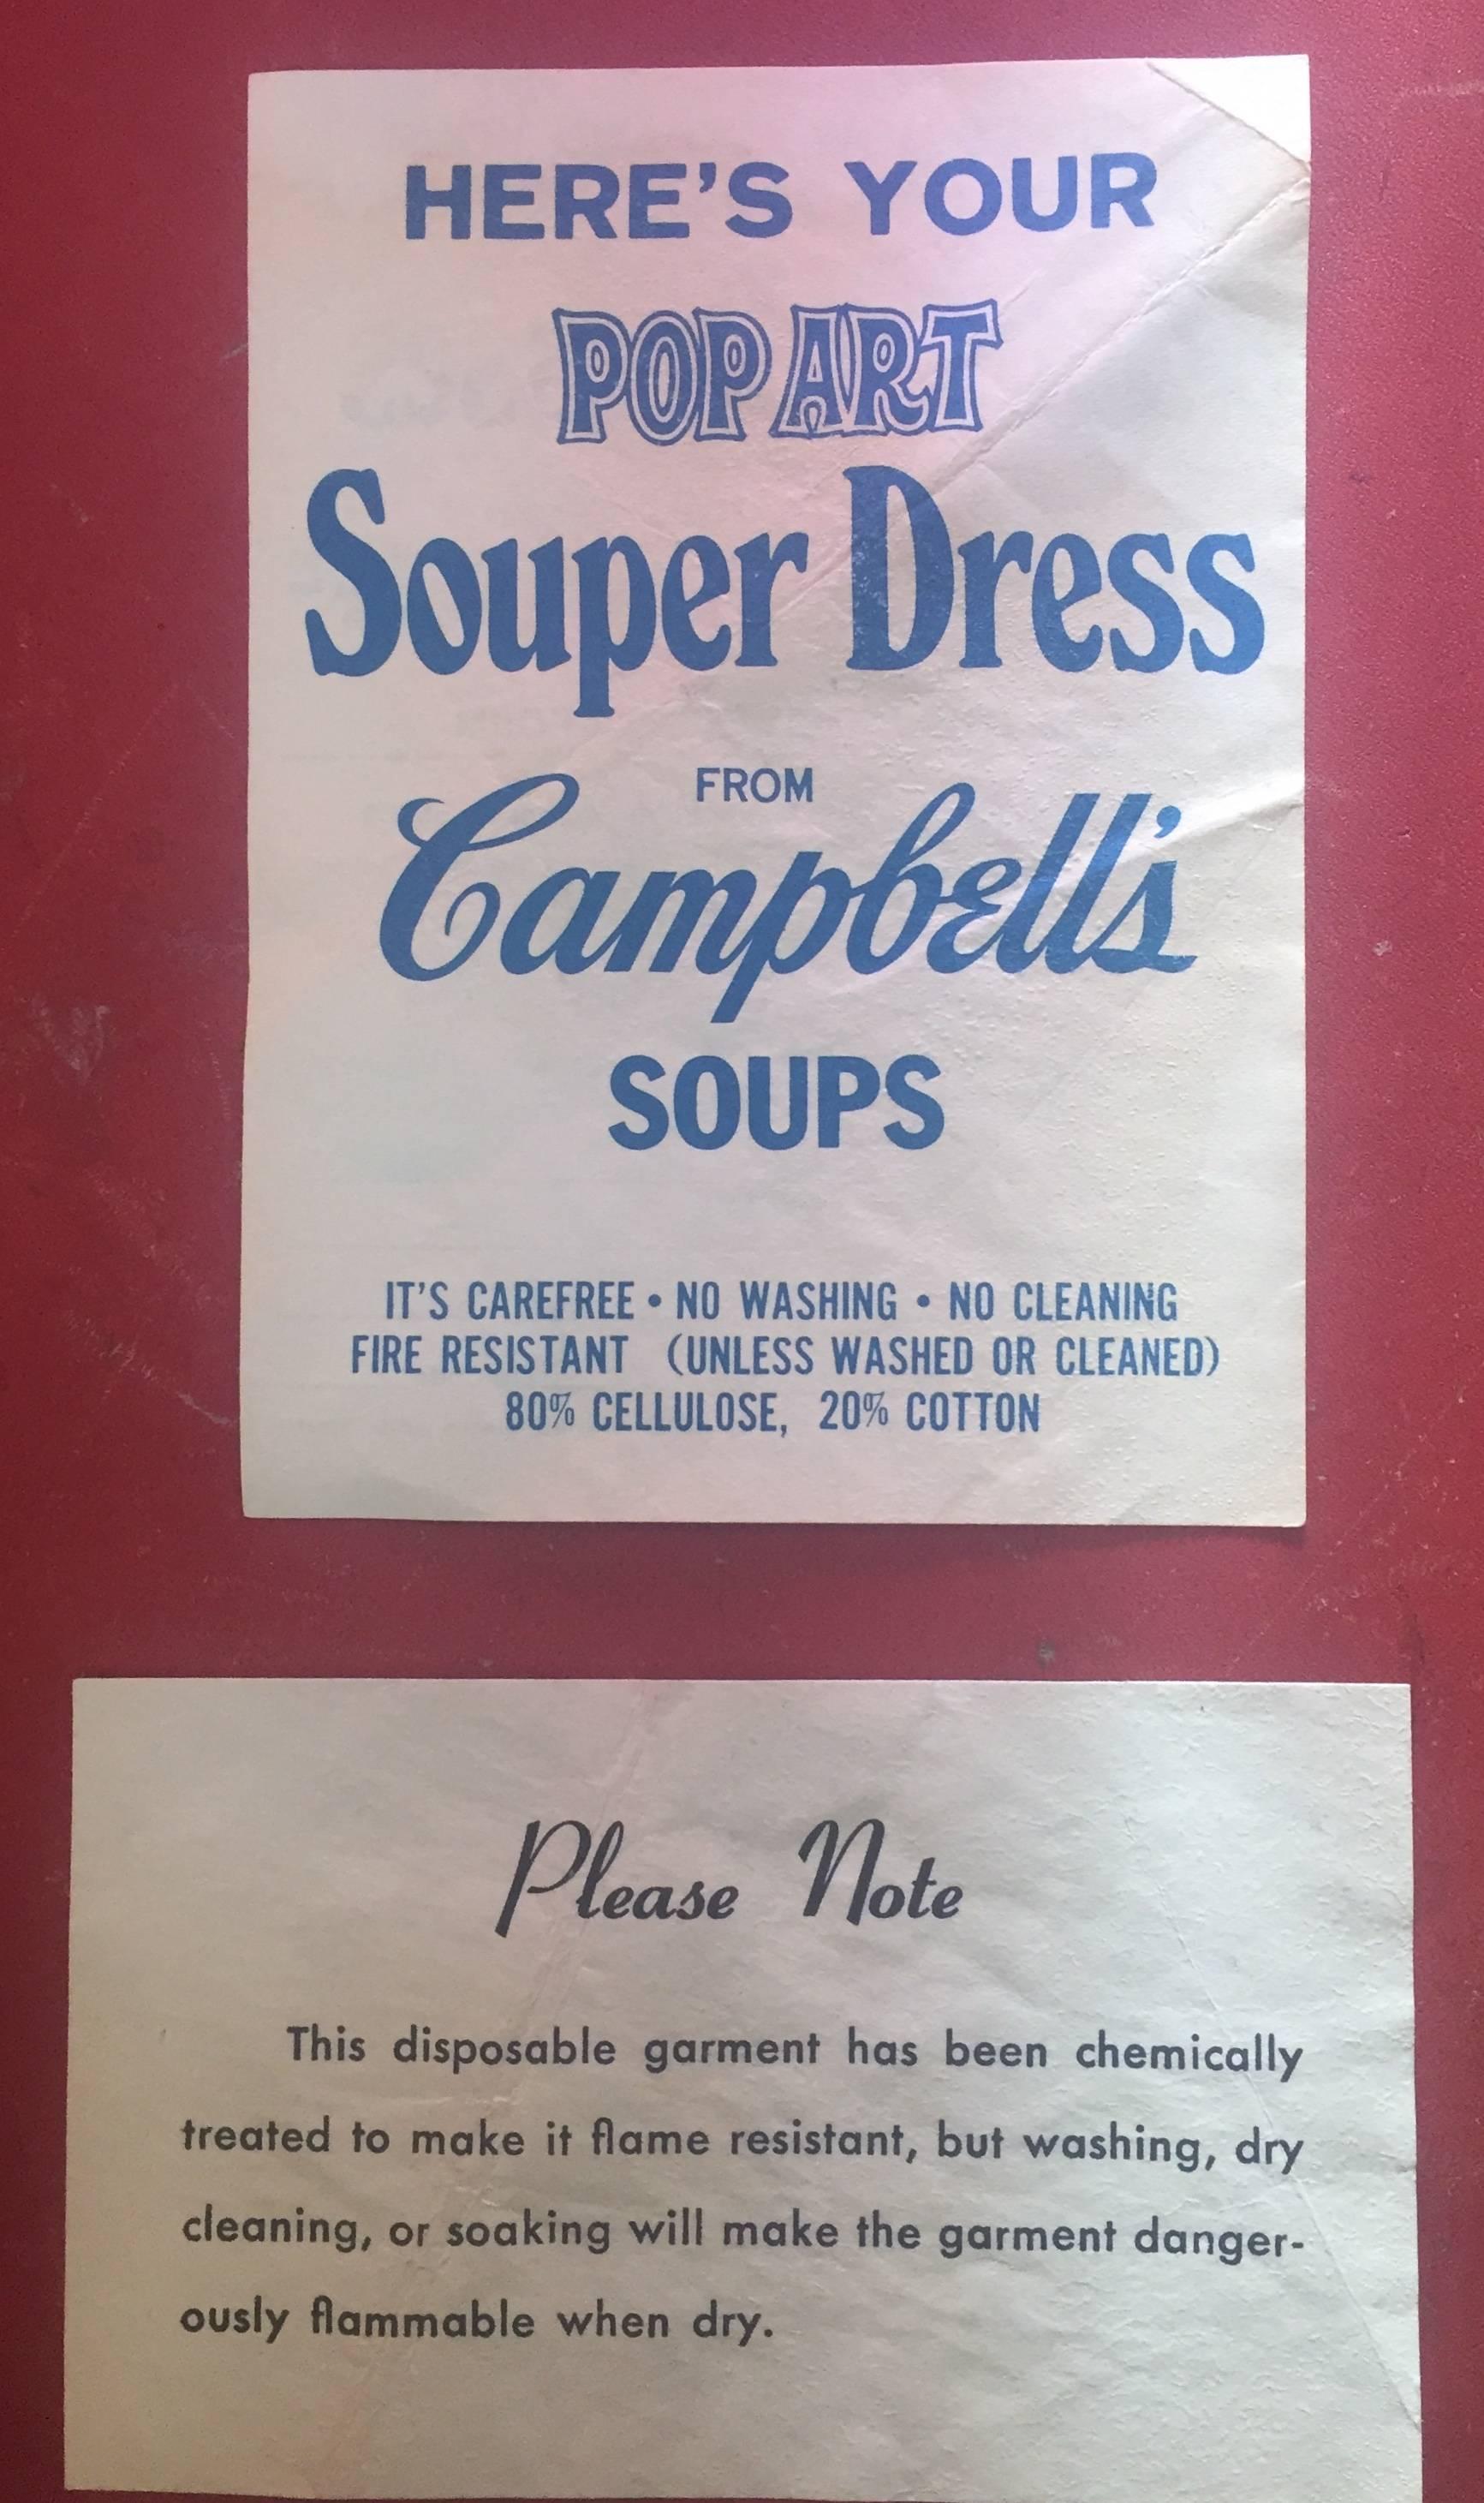 American From after Andy Warhol, the Souper Dress, circa 1968